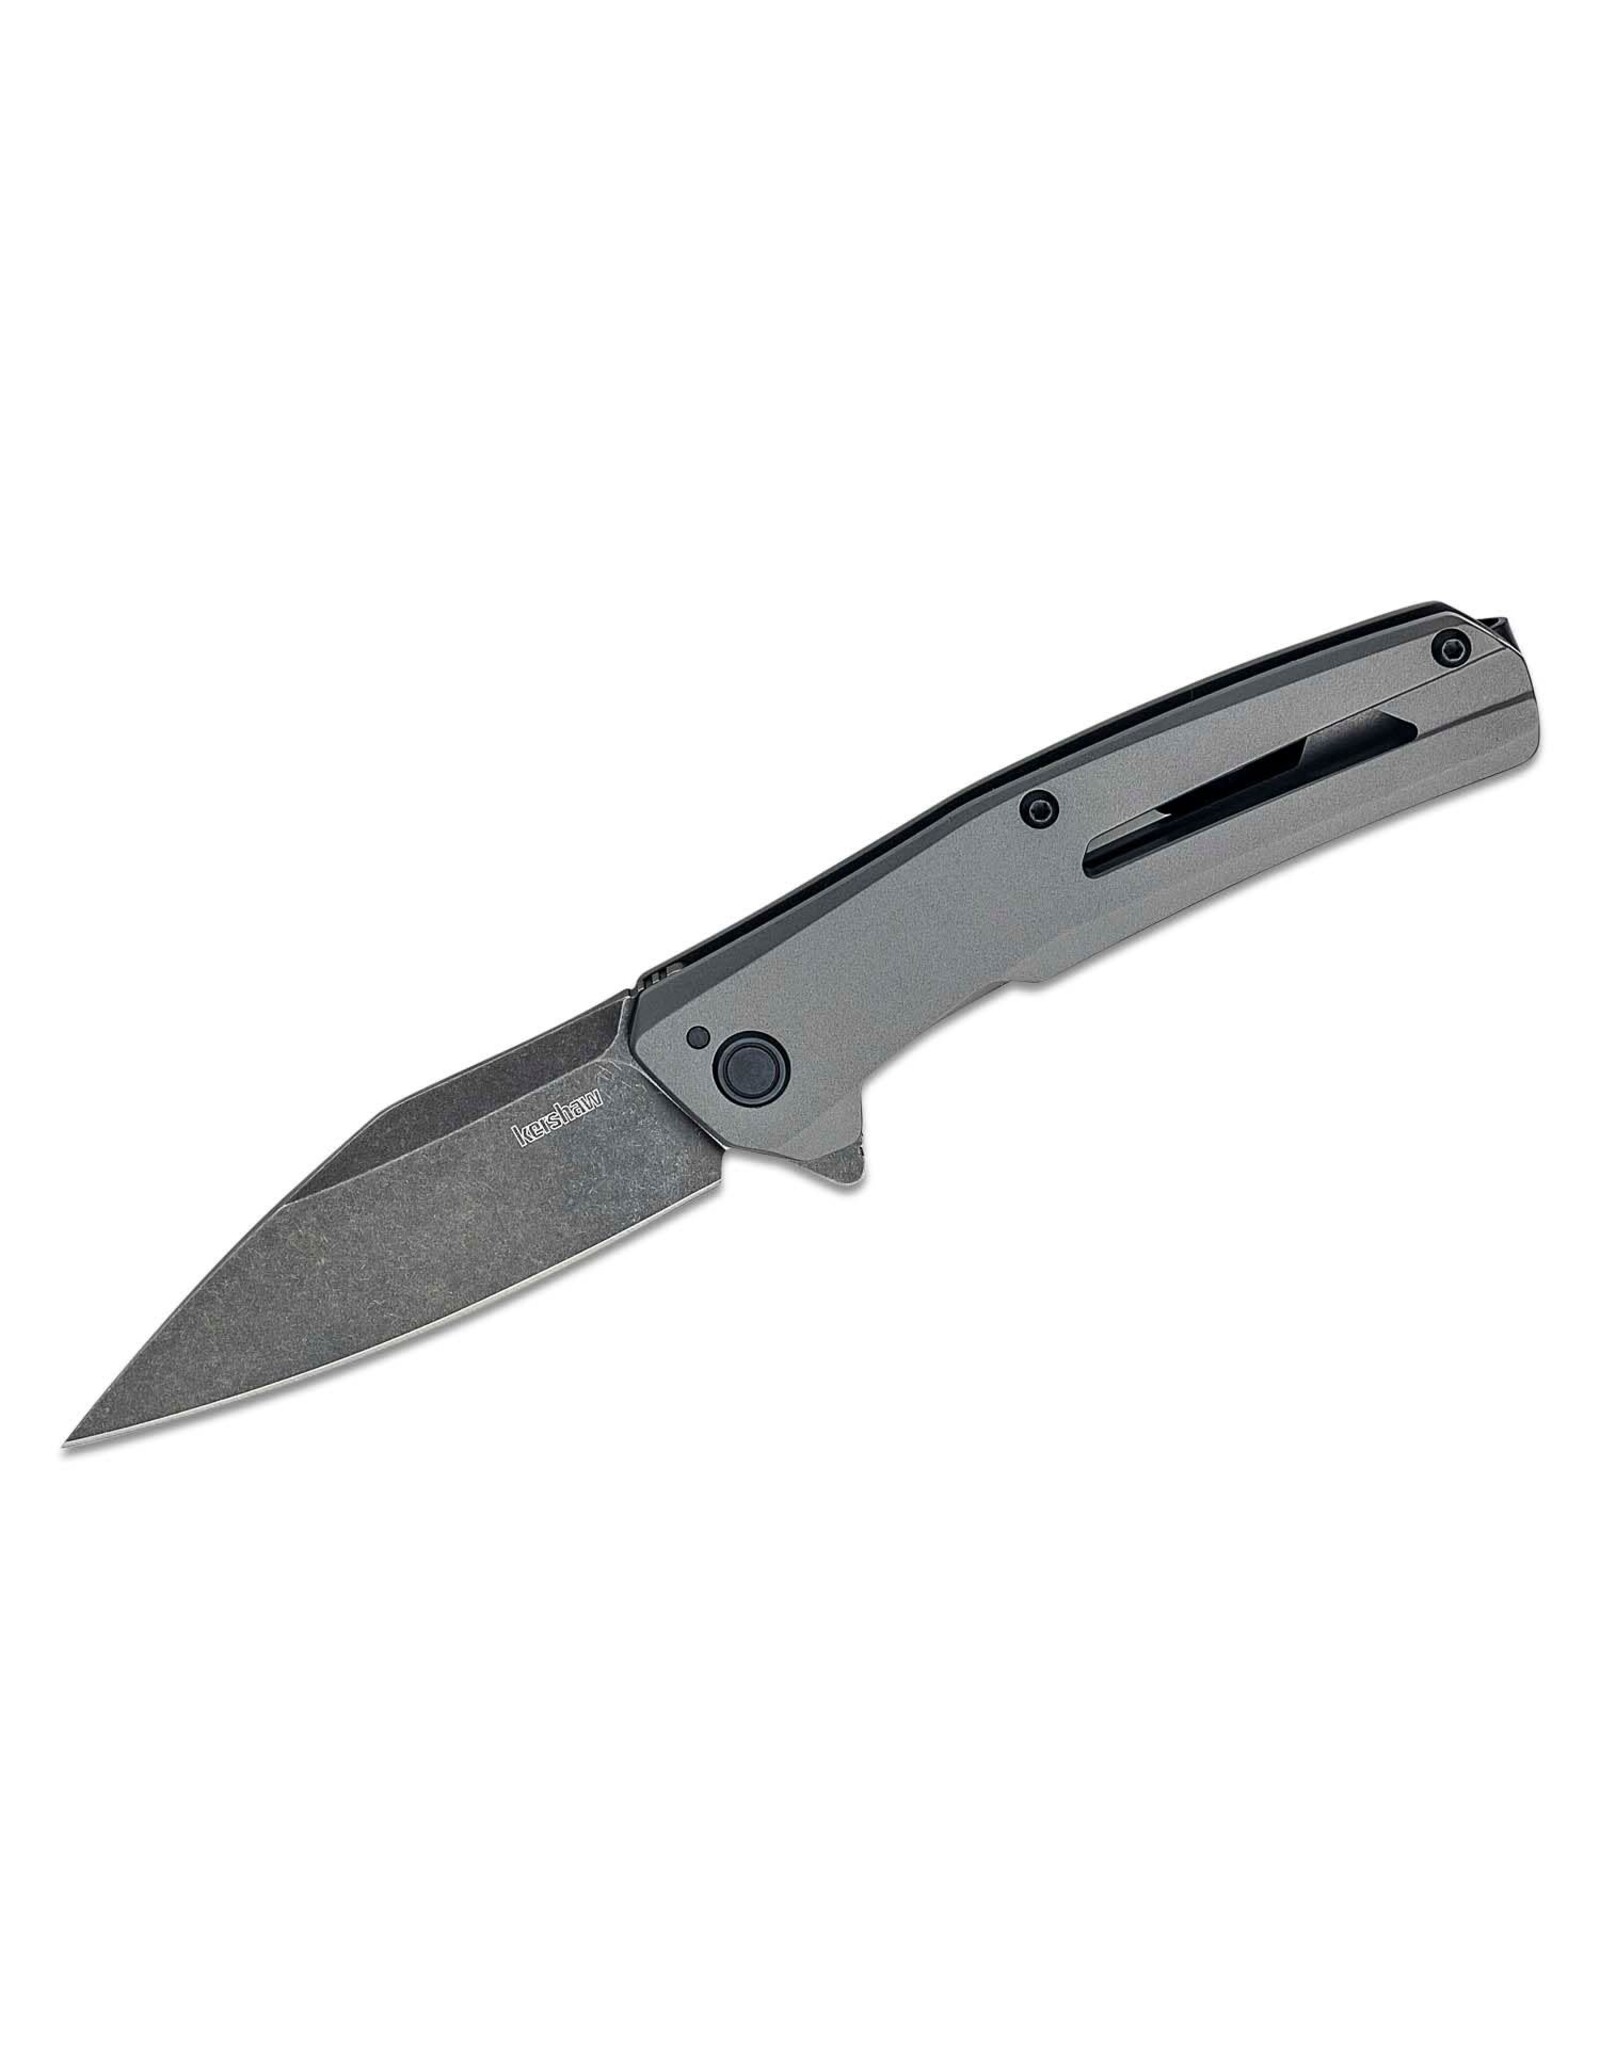 kershaw Kershaw 1404 Flyby Assisted Flipper Knife 3" D2 BlackWashed Modified Wharncliffe Blade, Gray PVD Stainless Steel Handles, Frame Lock